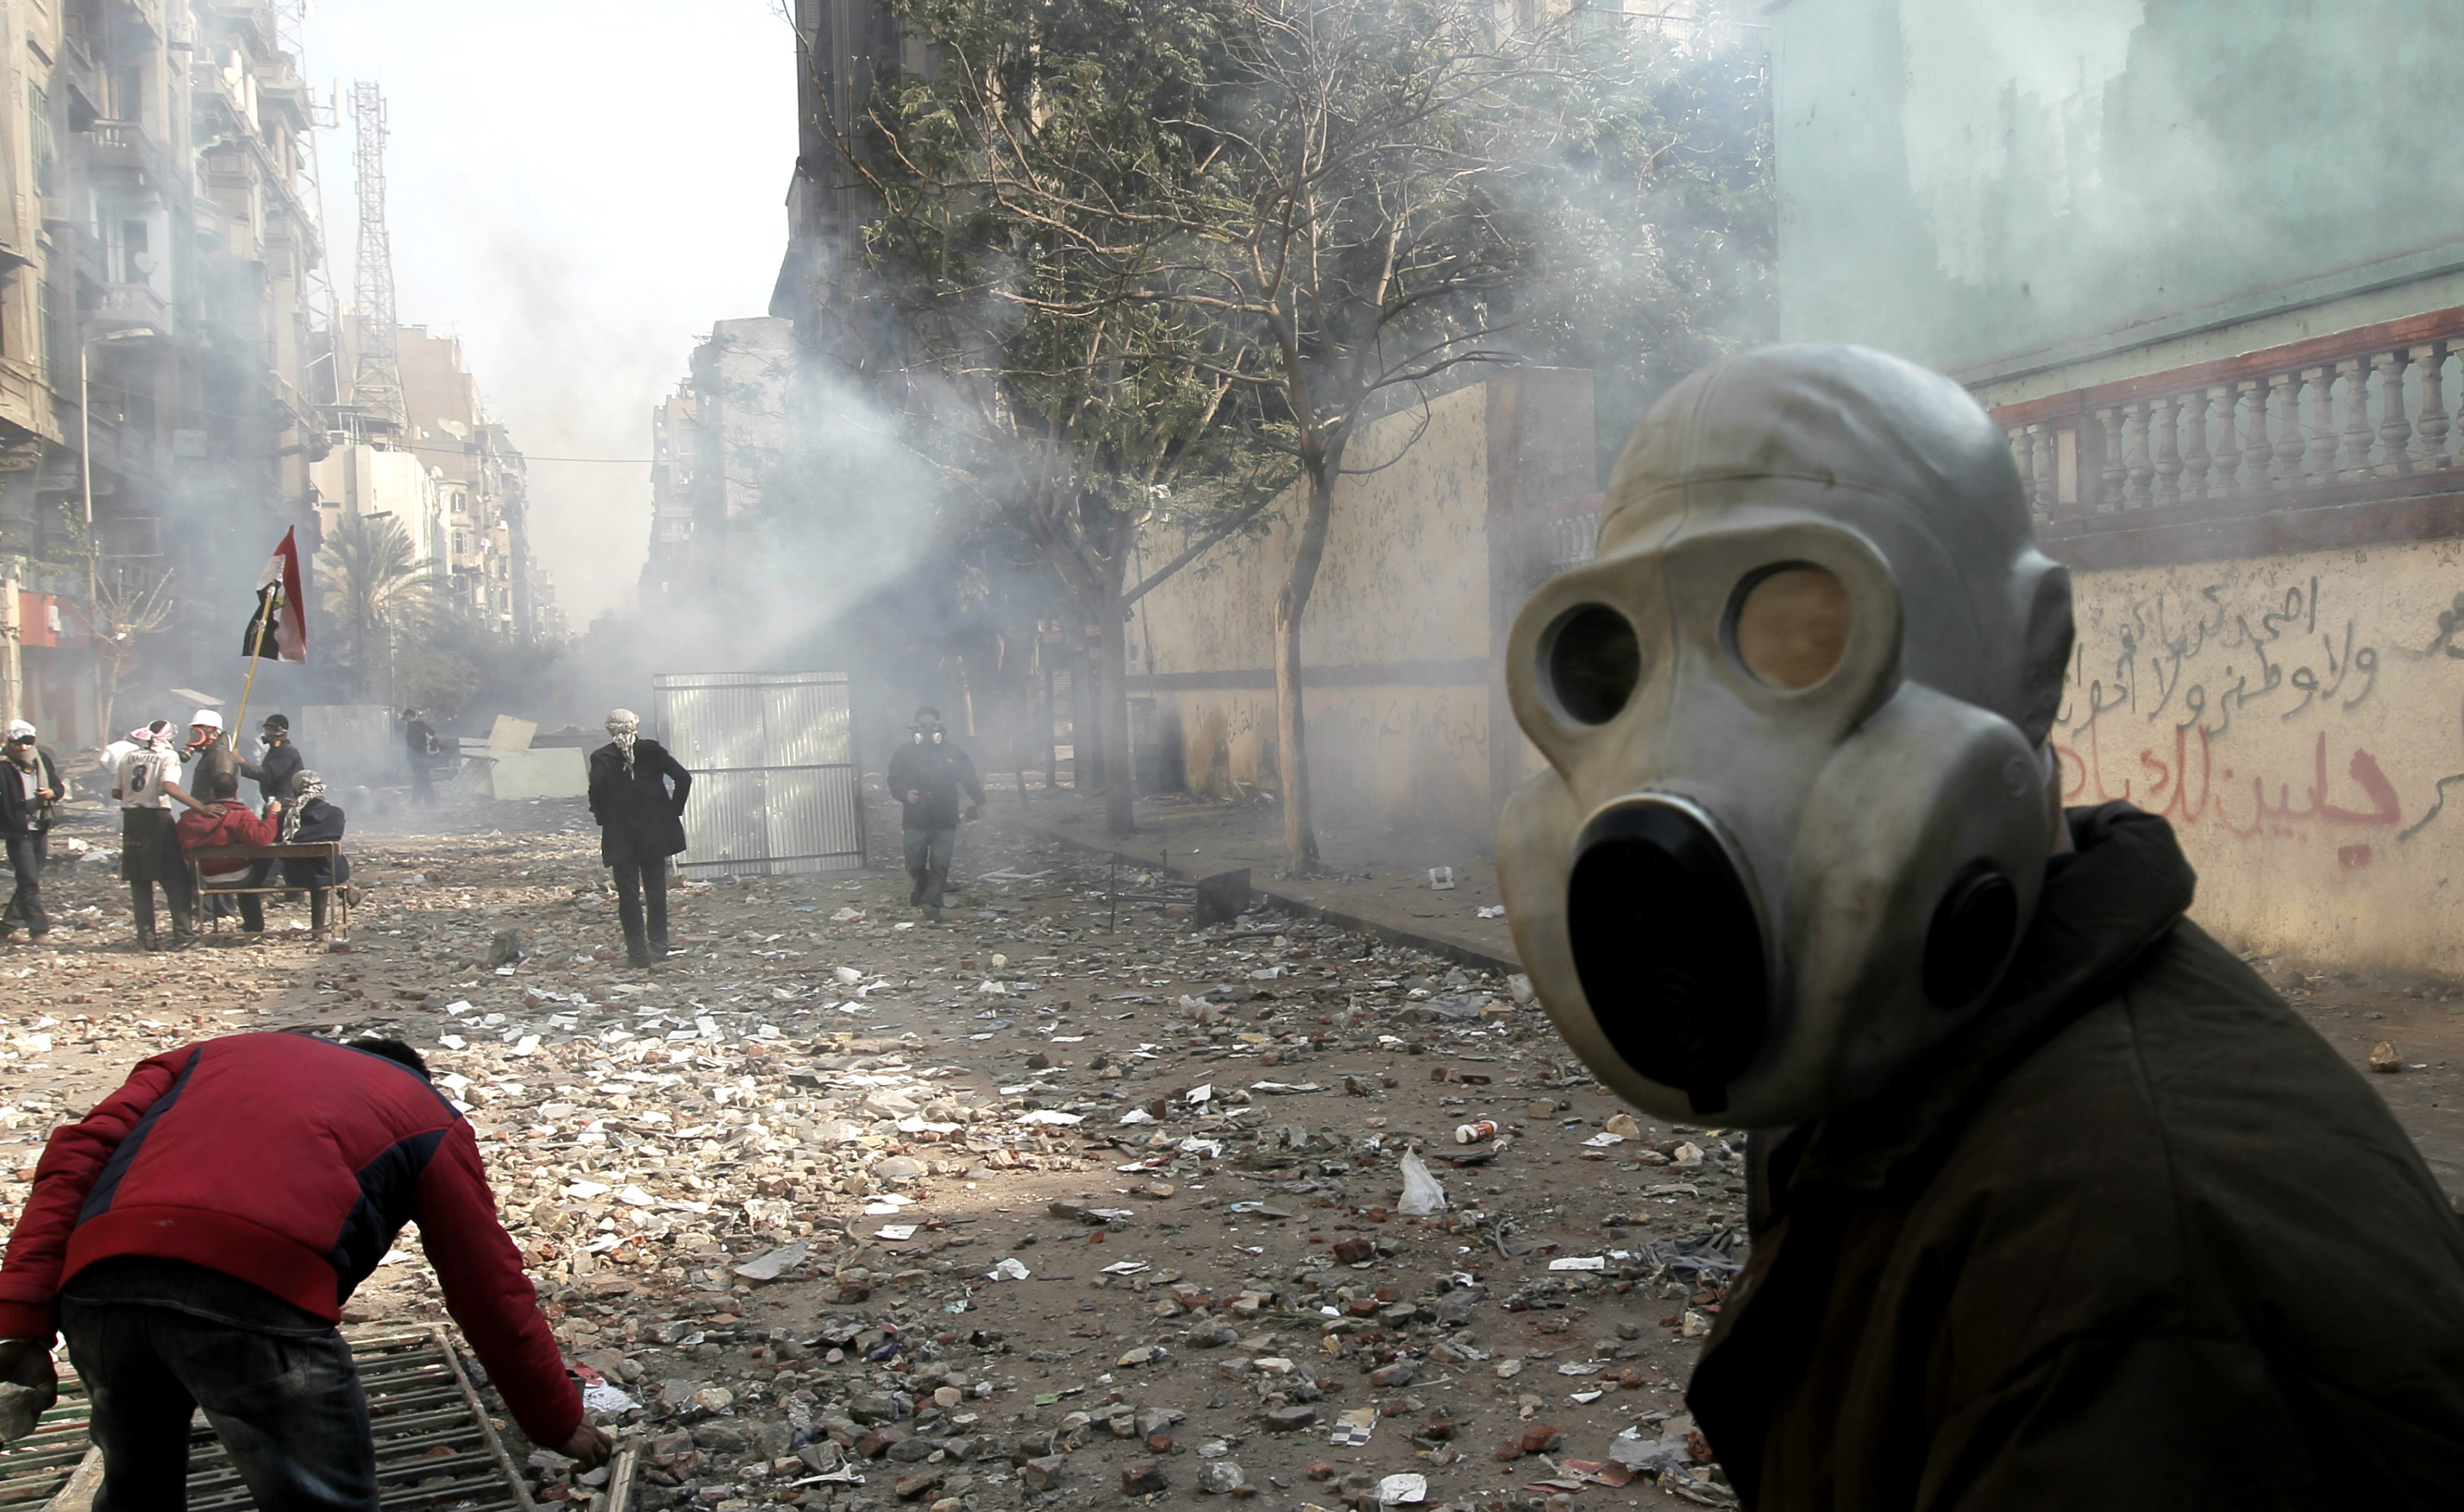 An Egyptian protester protects his face from tear gas during clashes with riot police near Tahrir Square, Cairo, in November 2011 (AFP)